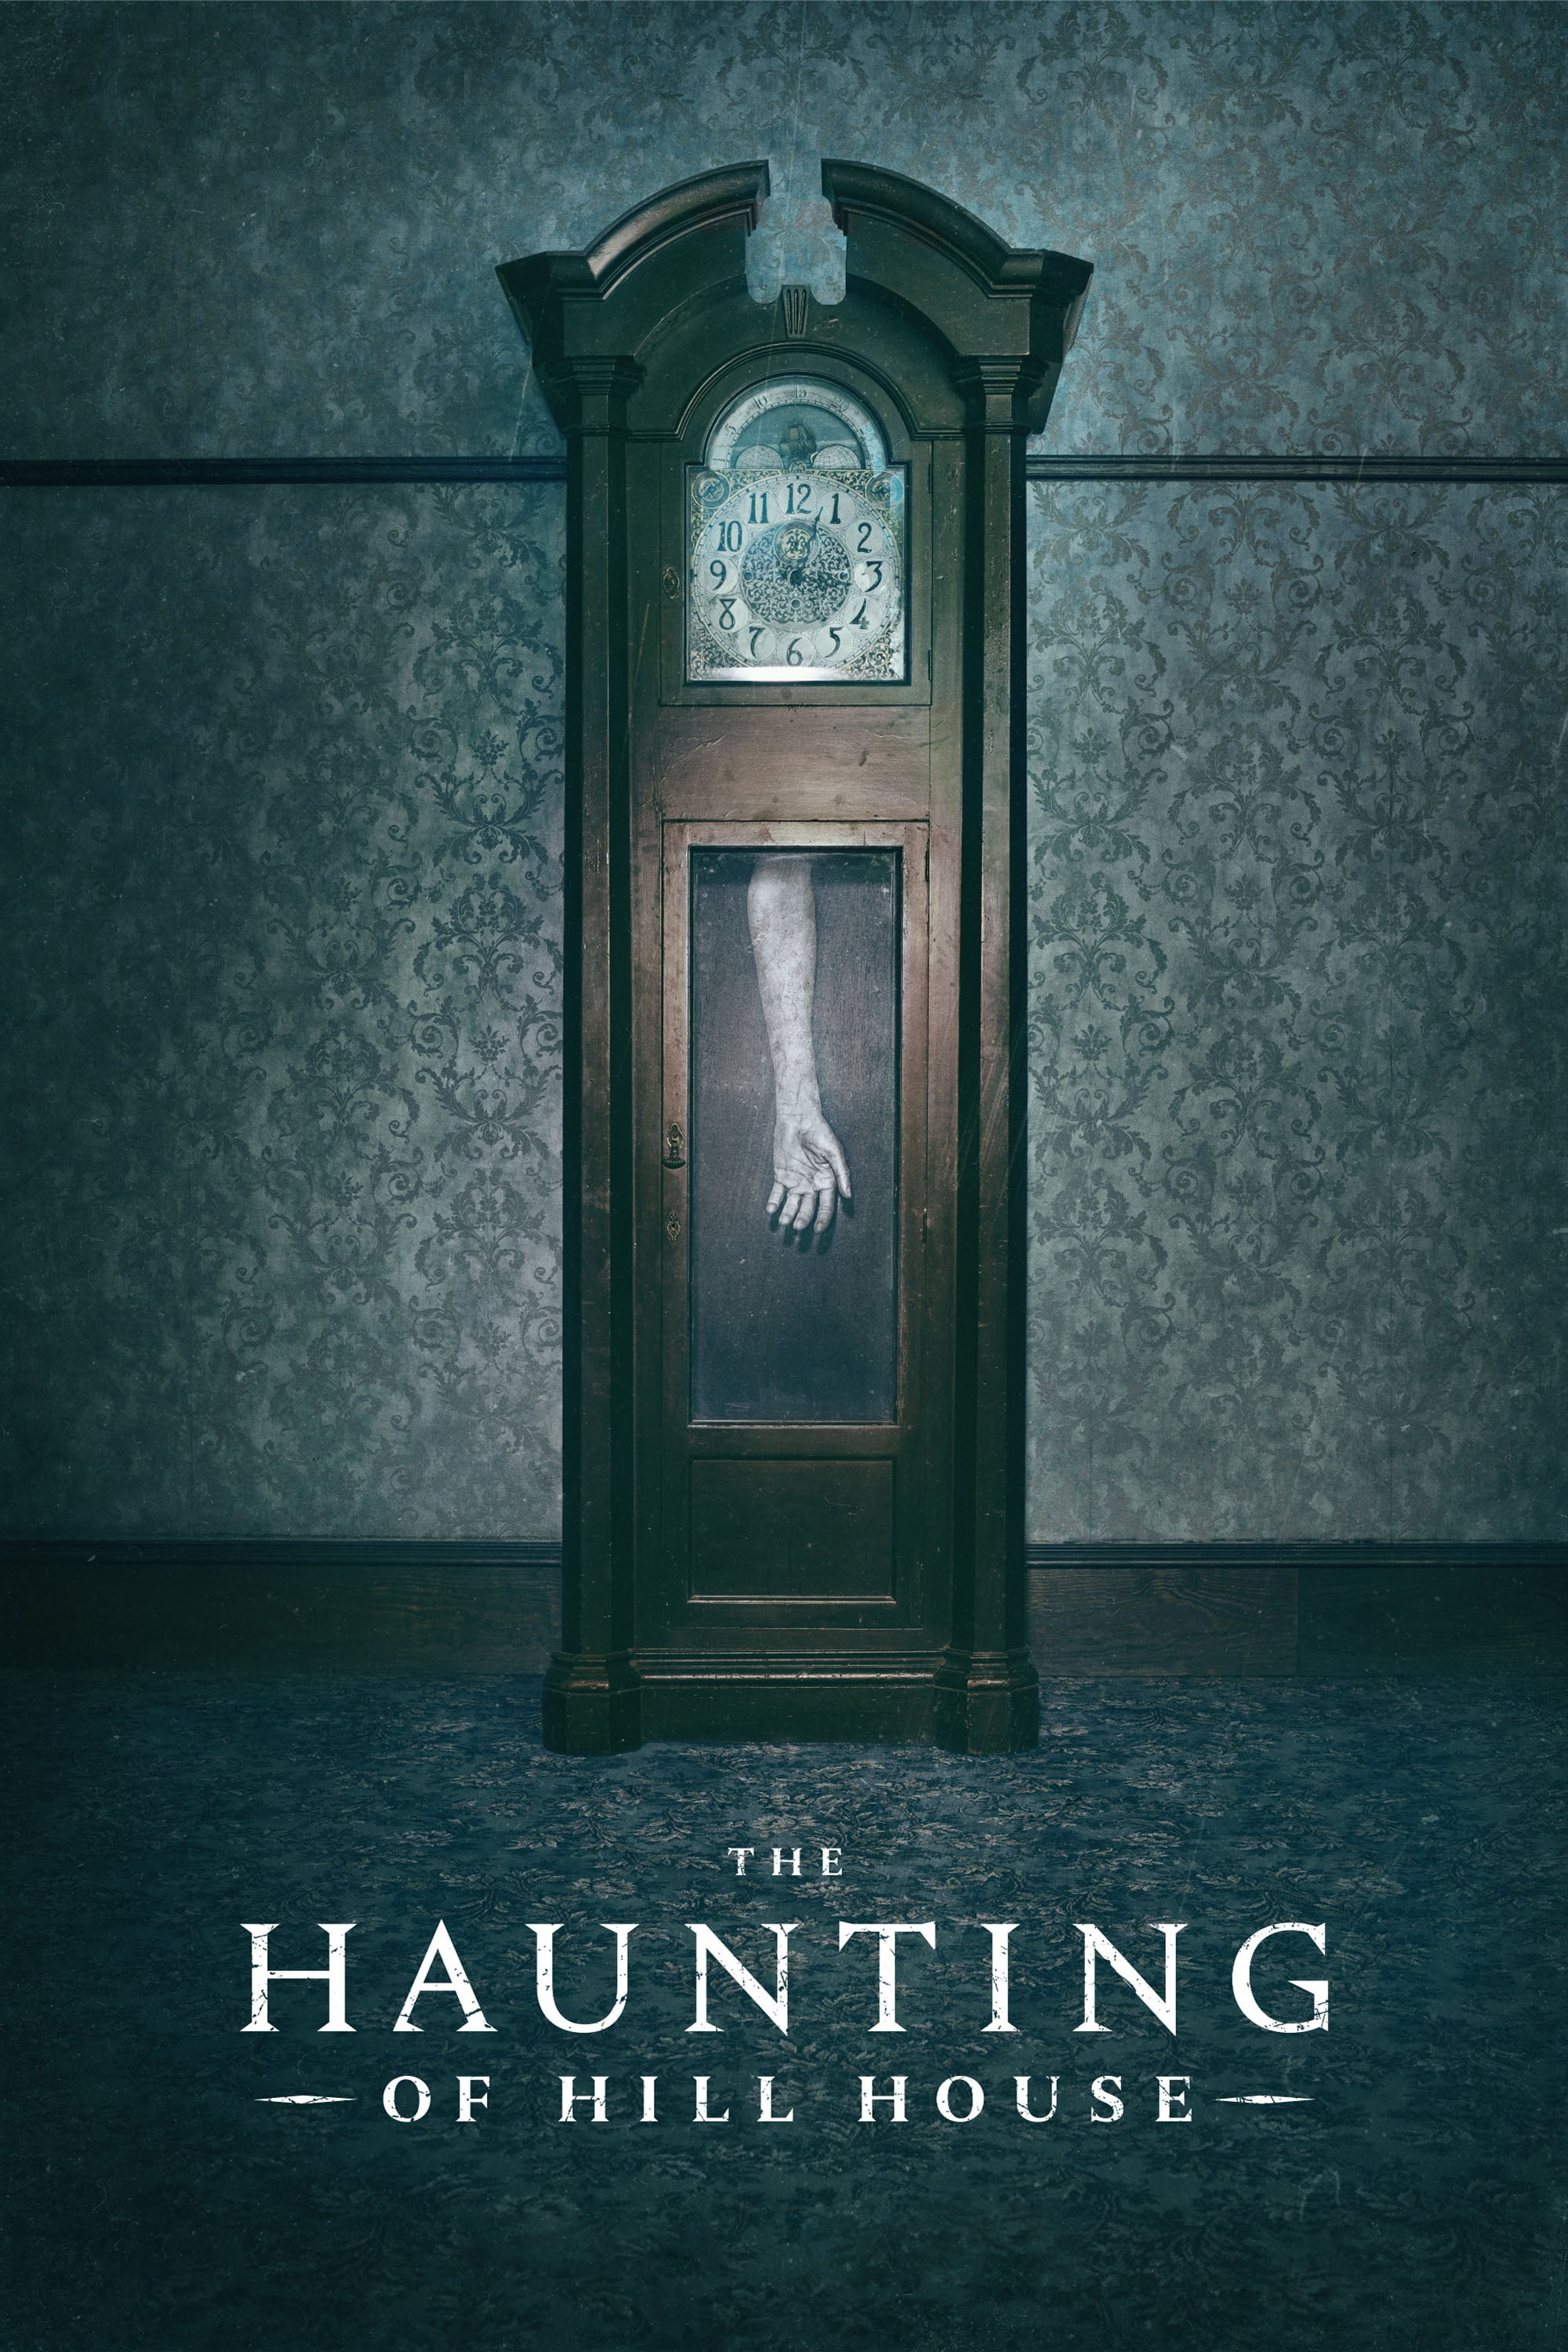 The Haunting of Hill House rating